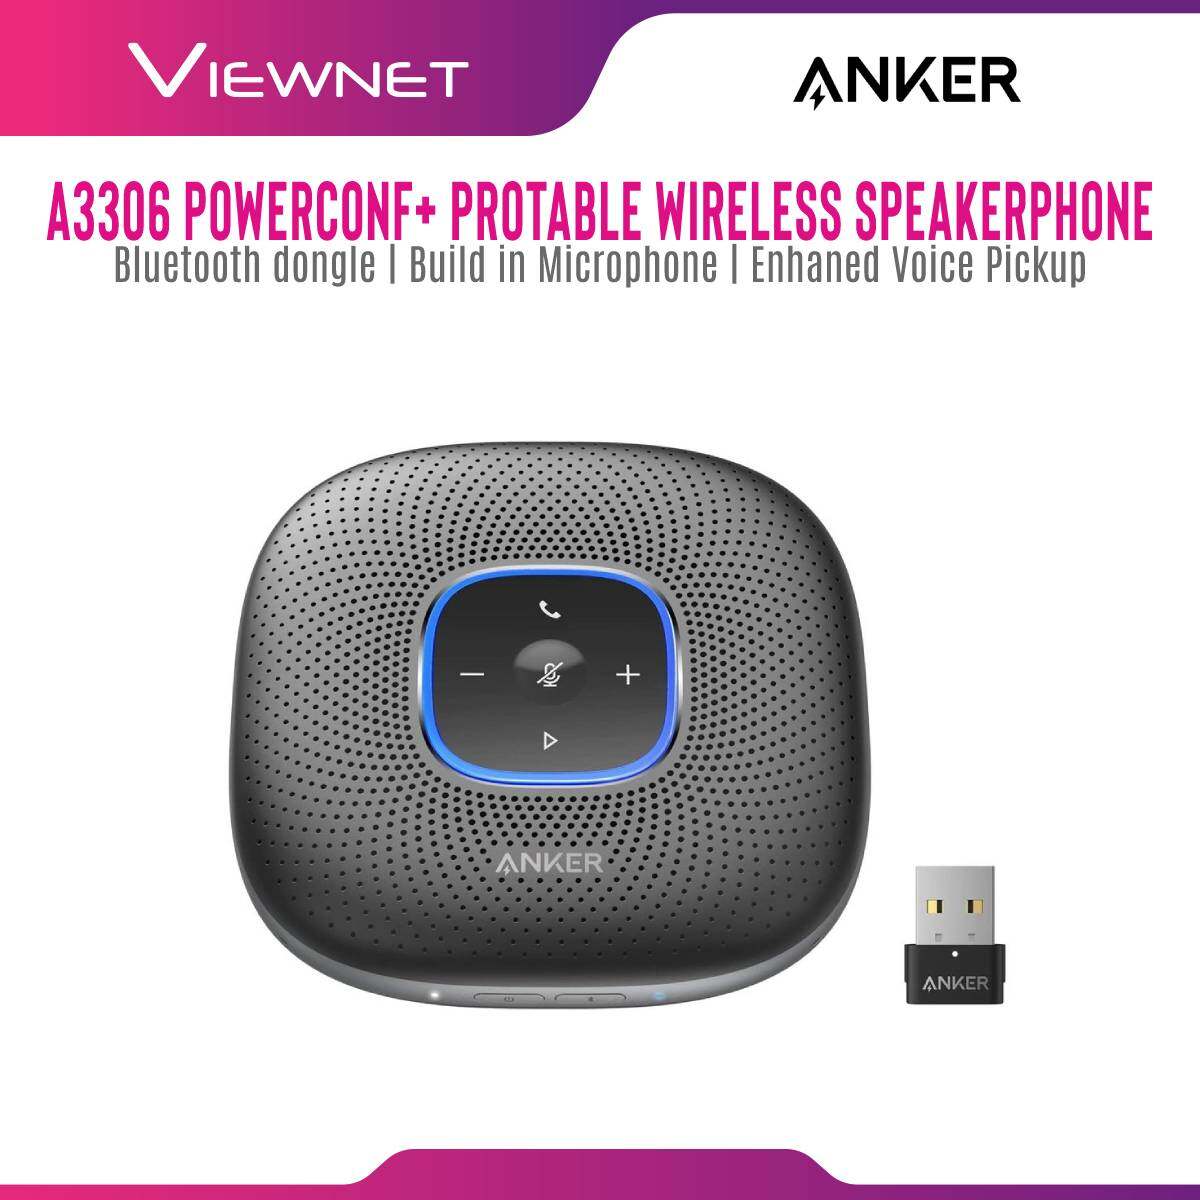 Anker A3306 Powerconf+ Protable Wireless Speakerphone , with Build in Microphone